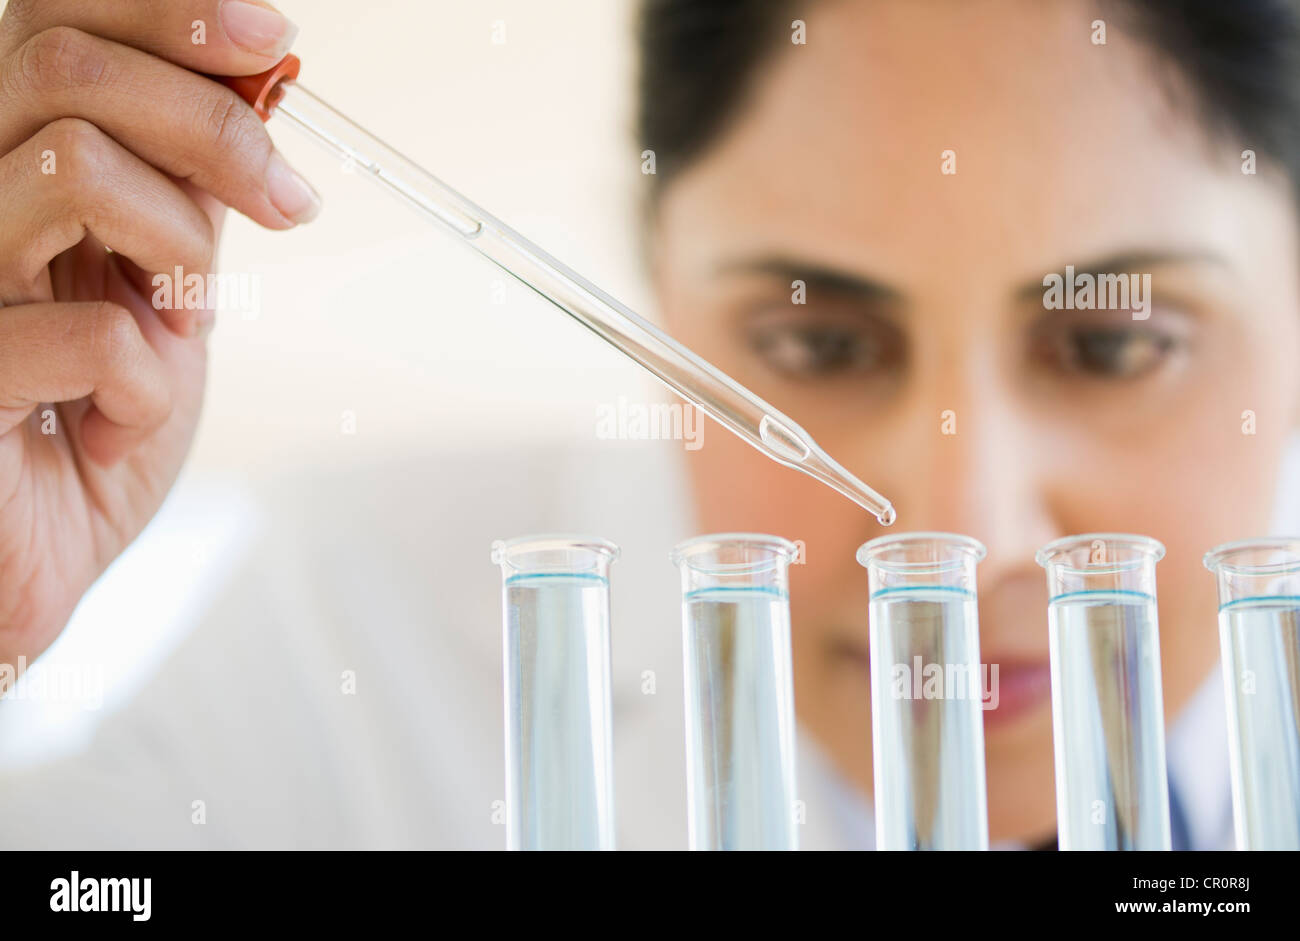 USA, New Jersey, Jersey City, Scientist pipetting liquid into test tubes Stock Photo